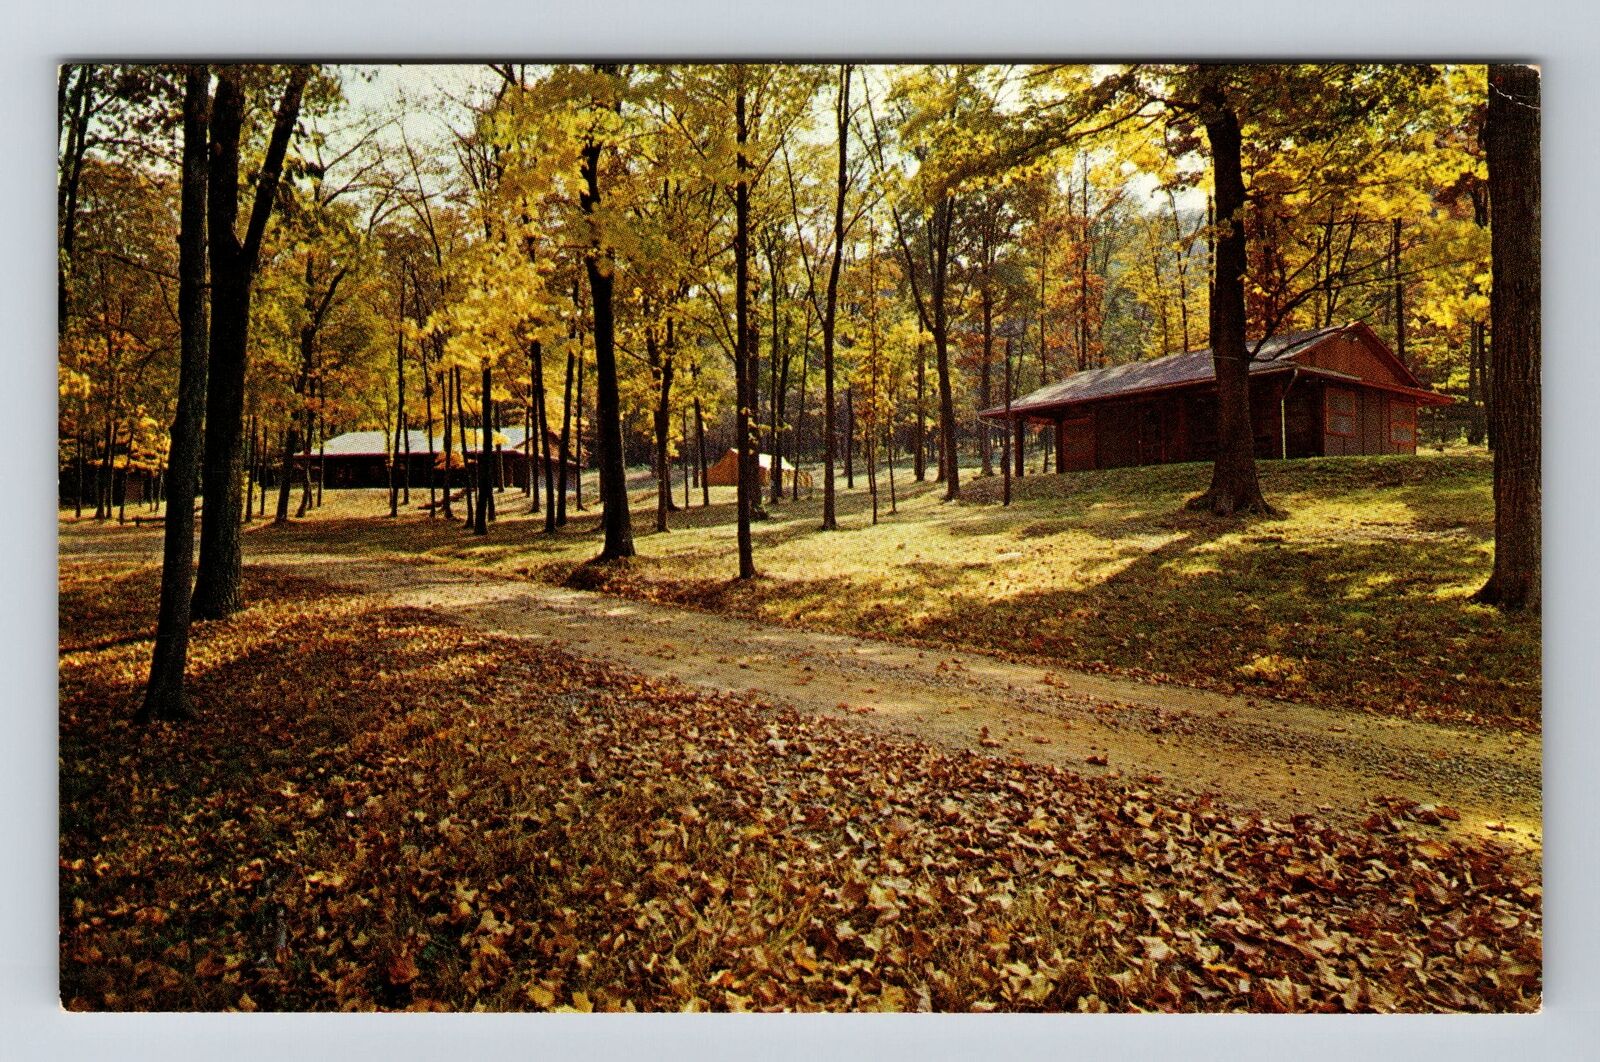 Loudonville OH-Ohio, Wooster Presbytery Camp, Vintage Postcard